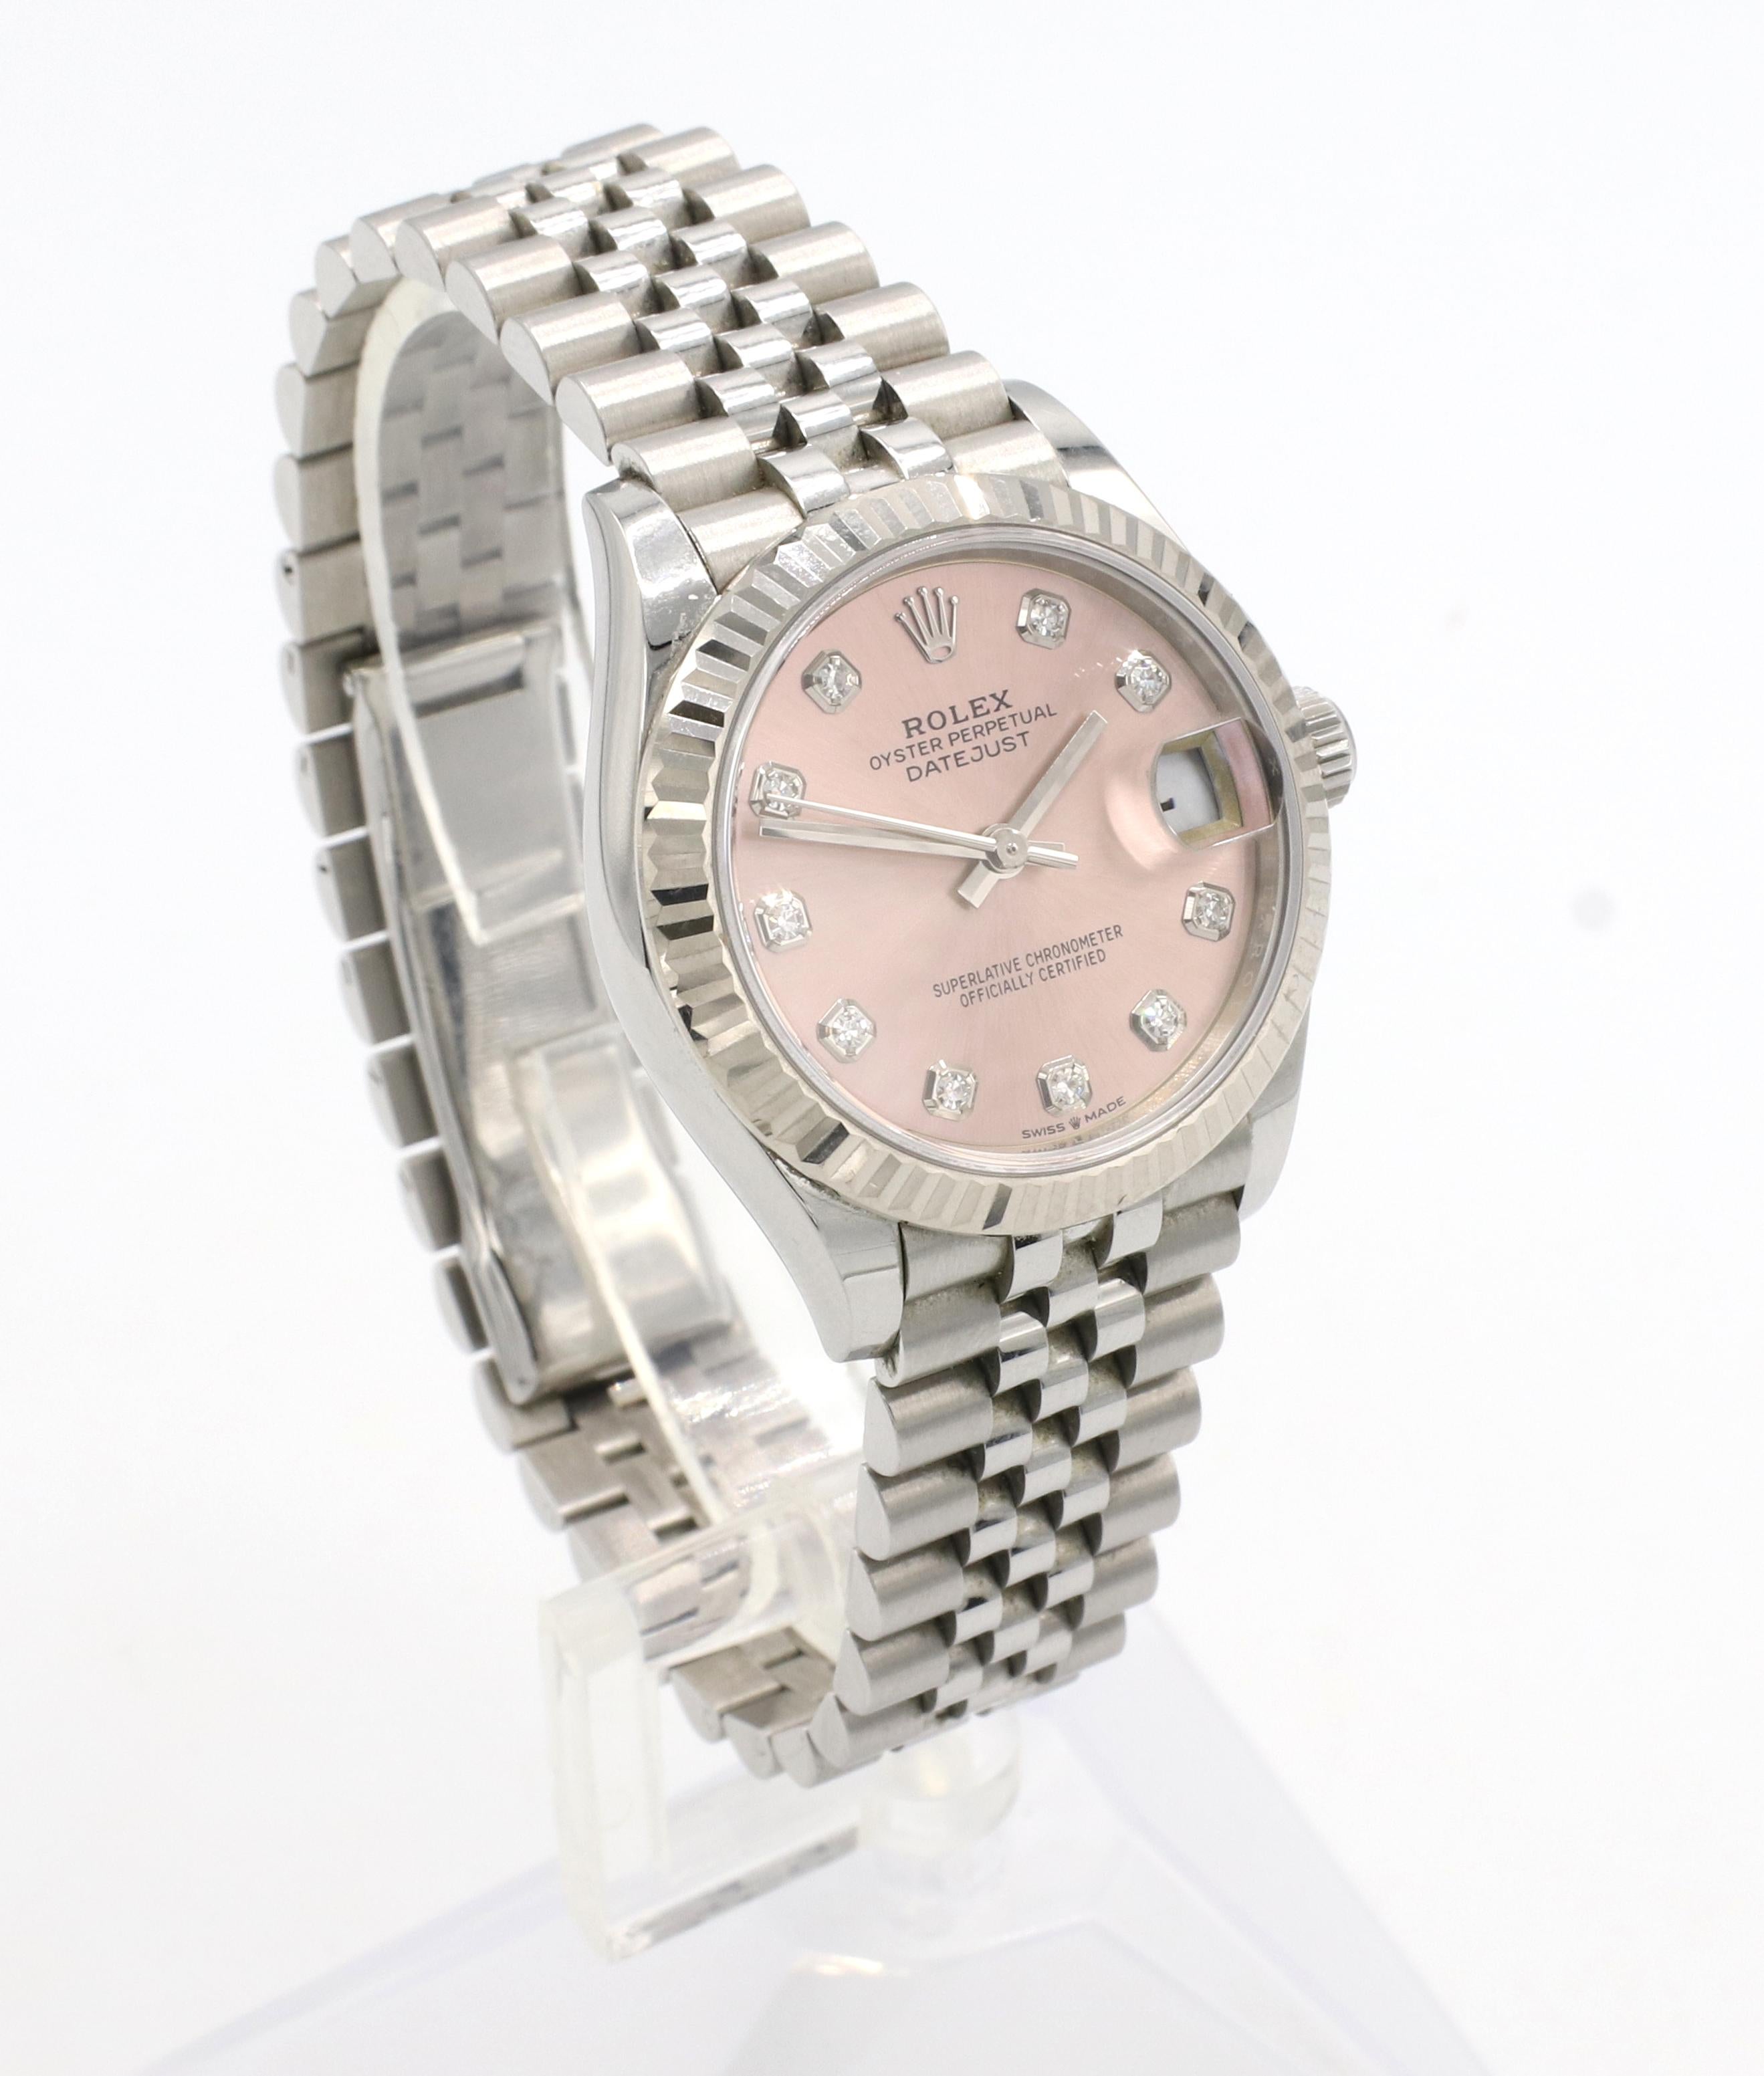 Rolex Datejust 31 Stainless Steel Pink Natural Diamond Dial Ladies Watch Reference 278274
Model: 278274
Serial: 561***** (card dated 2021)
Metal: Stainless steel
Movement: Automatic
Case: 31mm
Bezel: Polished 18k white gold fluted bezel
Dial: Pink,